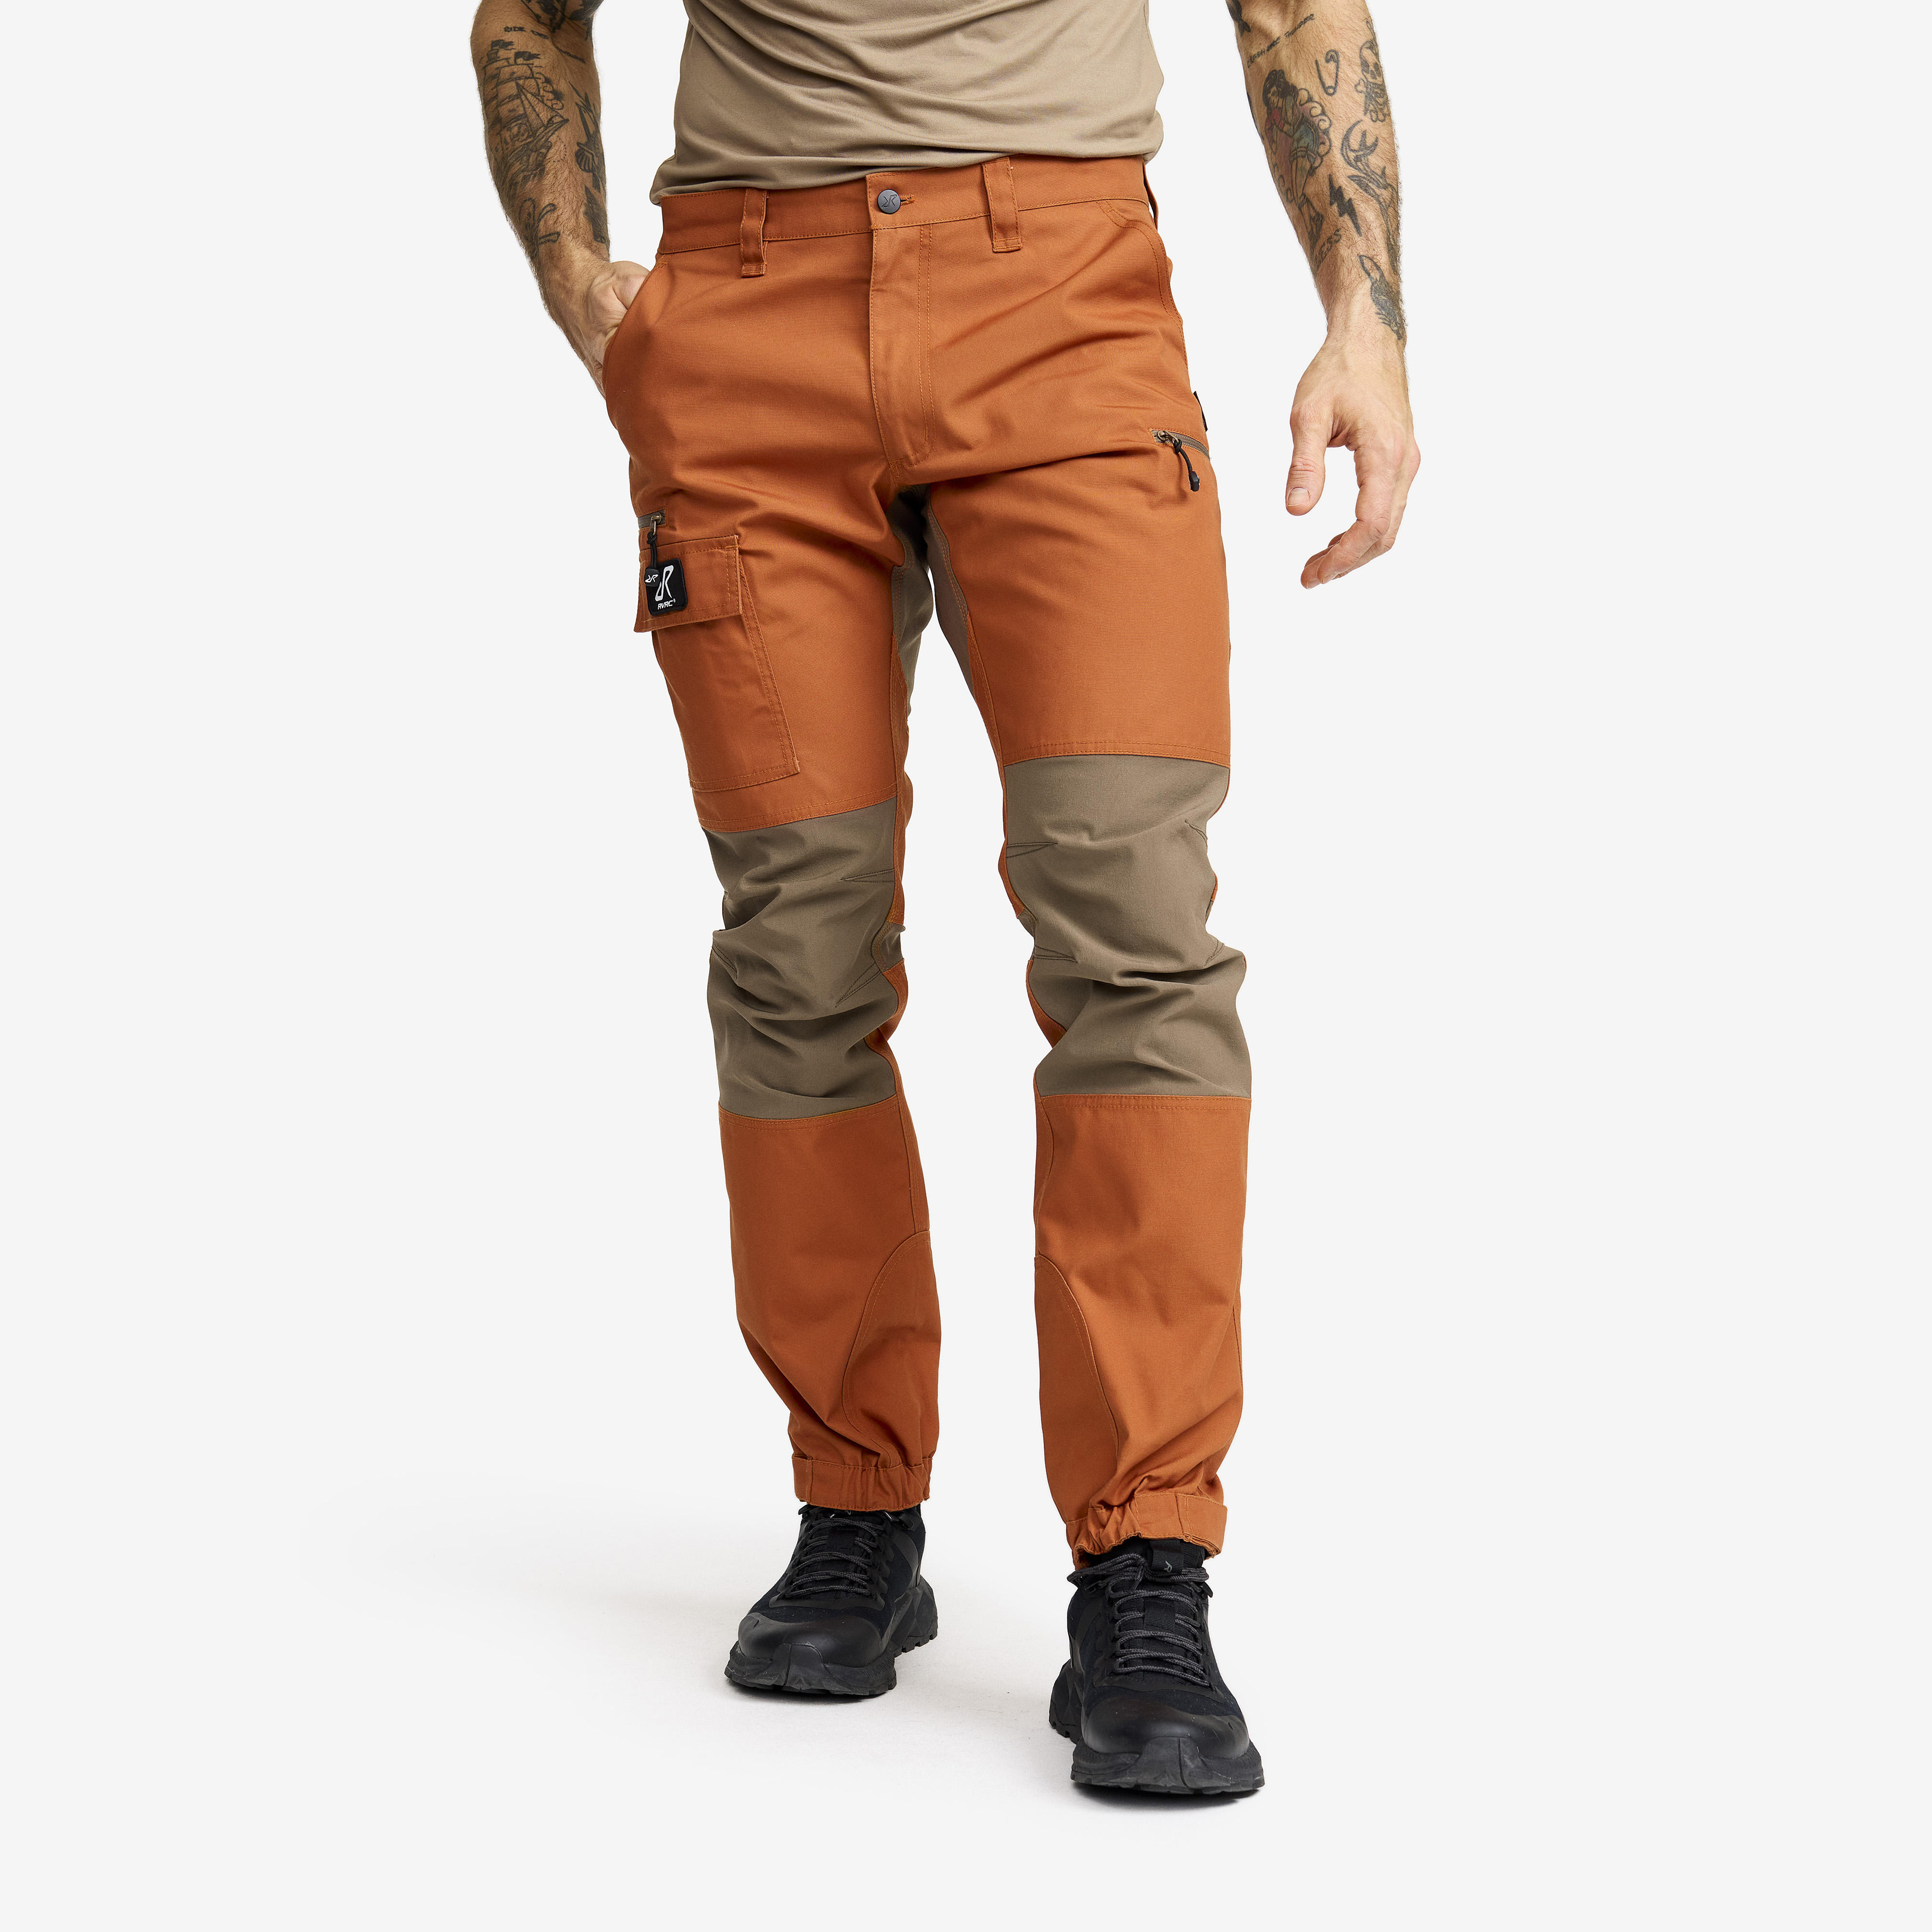 Nordwand Pants Teracotta Brown/chocolate Chip Miehet